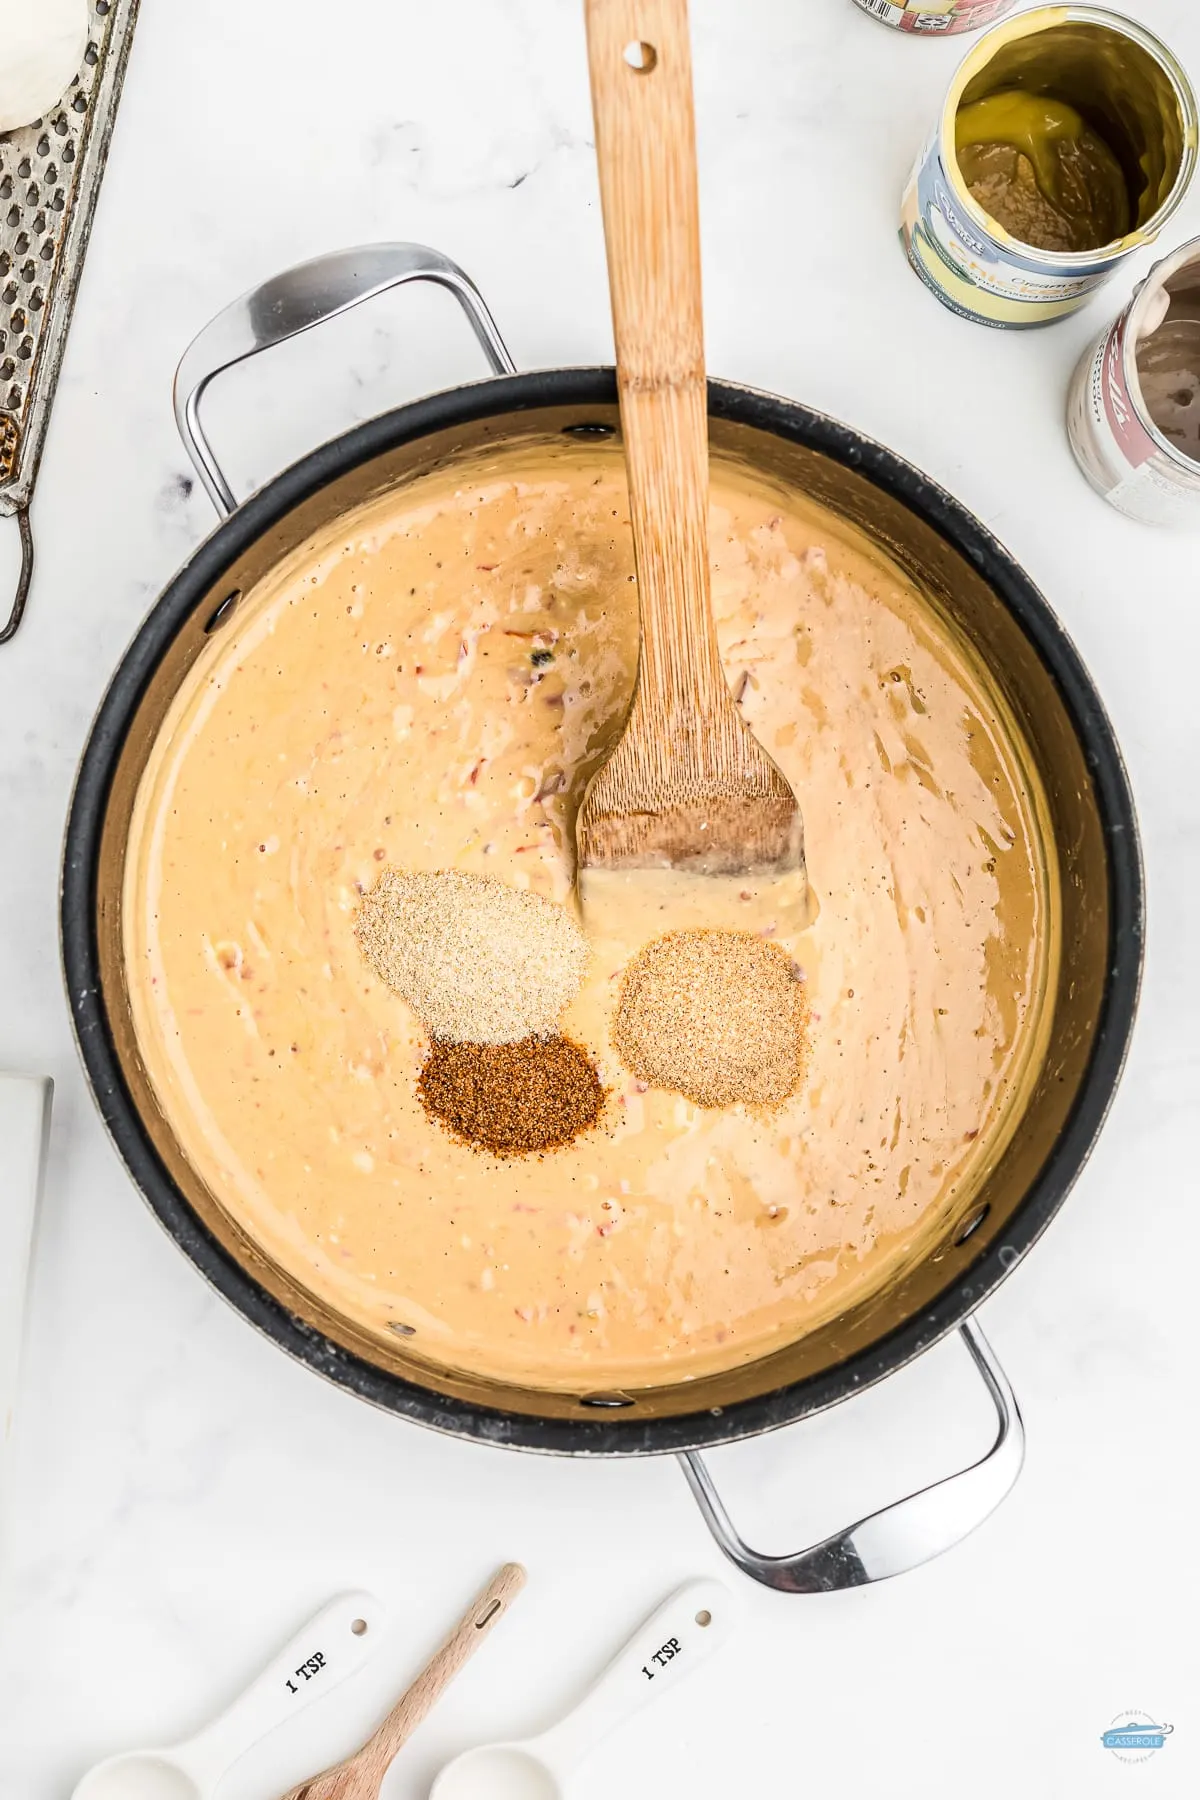 pot of cheese sauce with spices on it